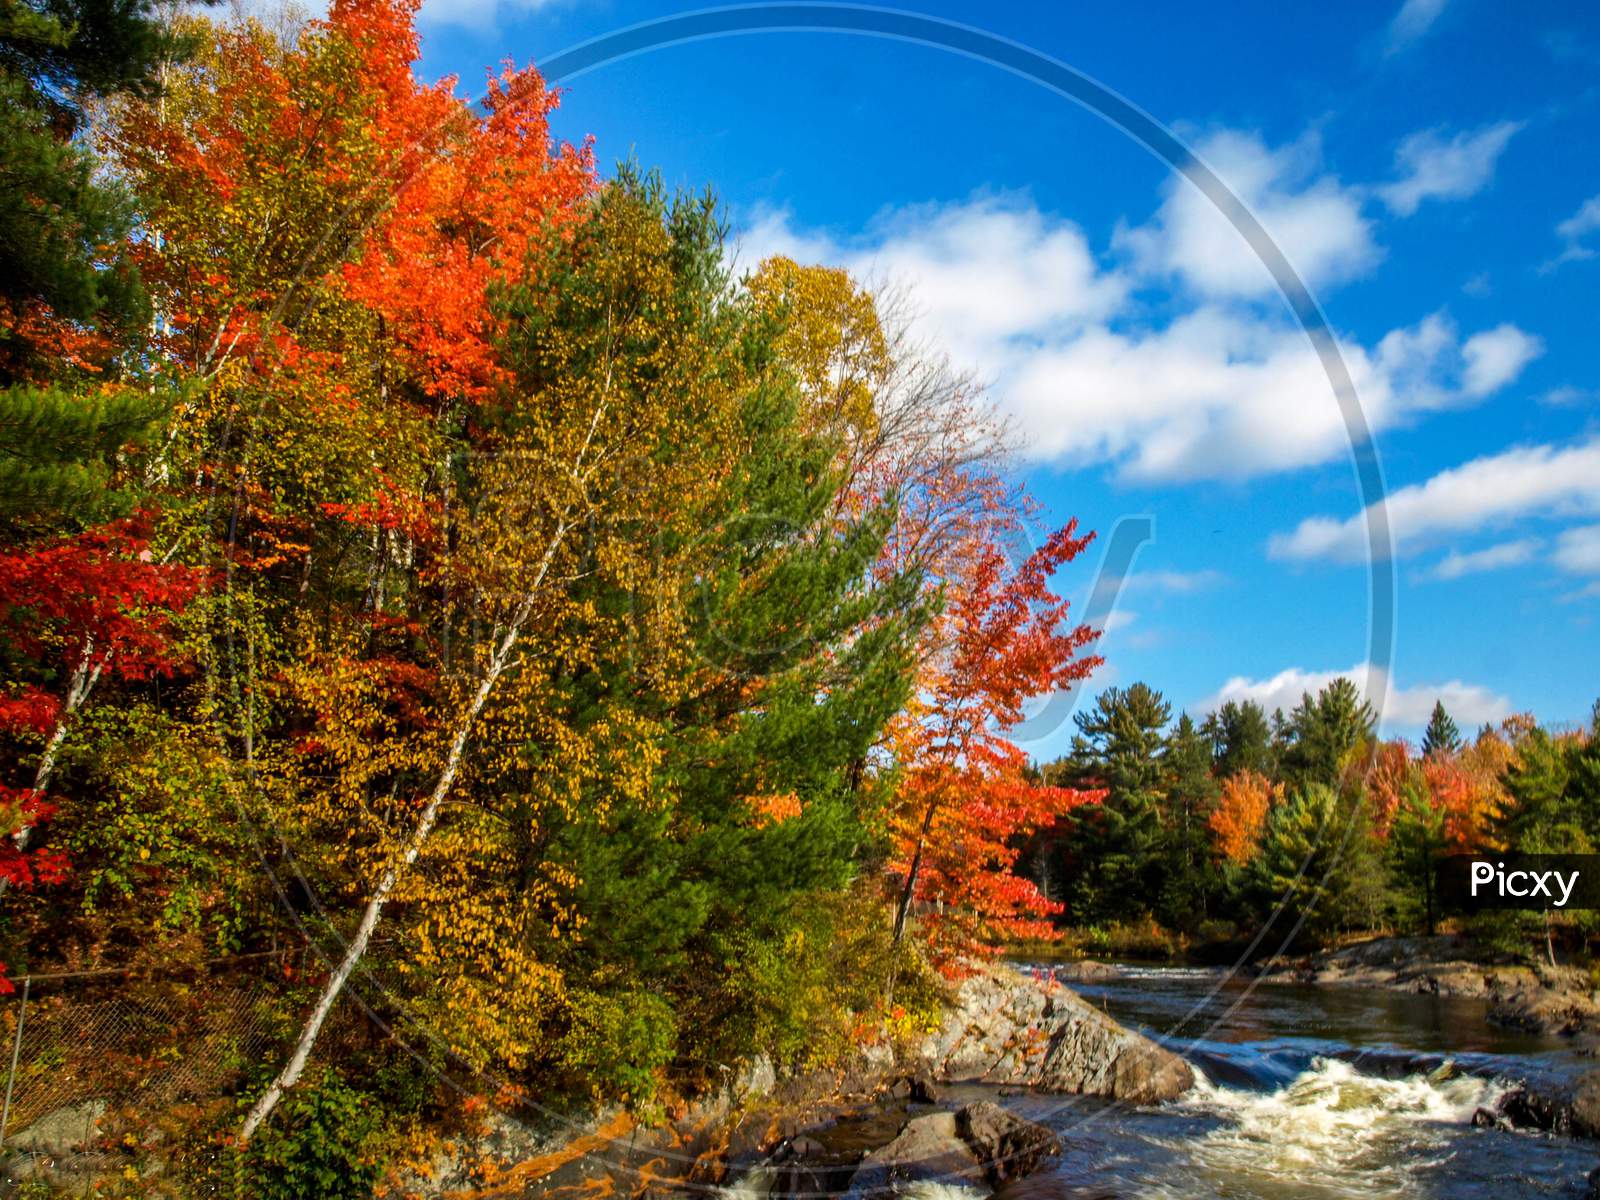 Only the colorful trees, river, clouds and blue sky - Chutes Prov Park, ON, Canada